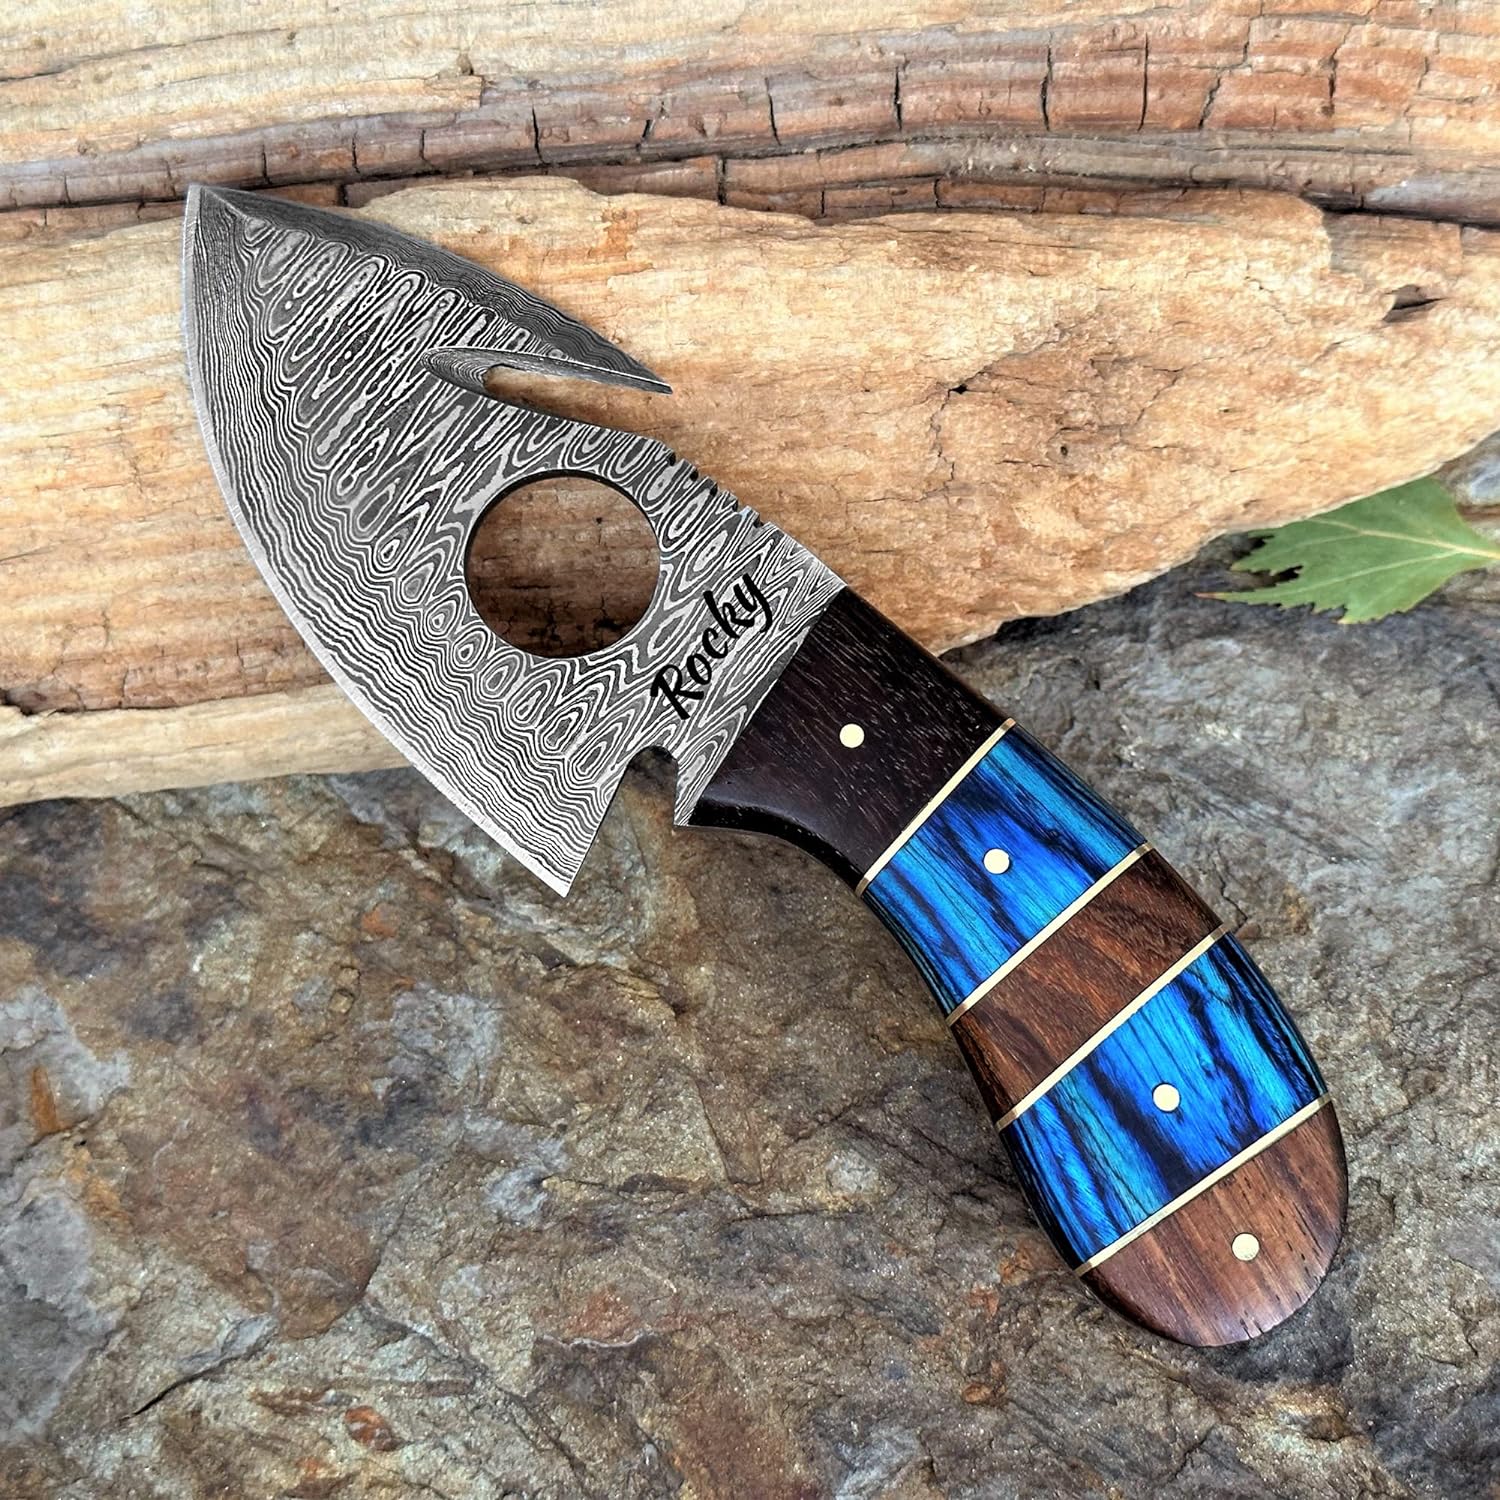 Damascus Steel Fixed Blade Gut Hook Knife With Wood Handle - 7